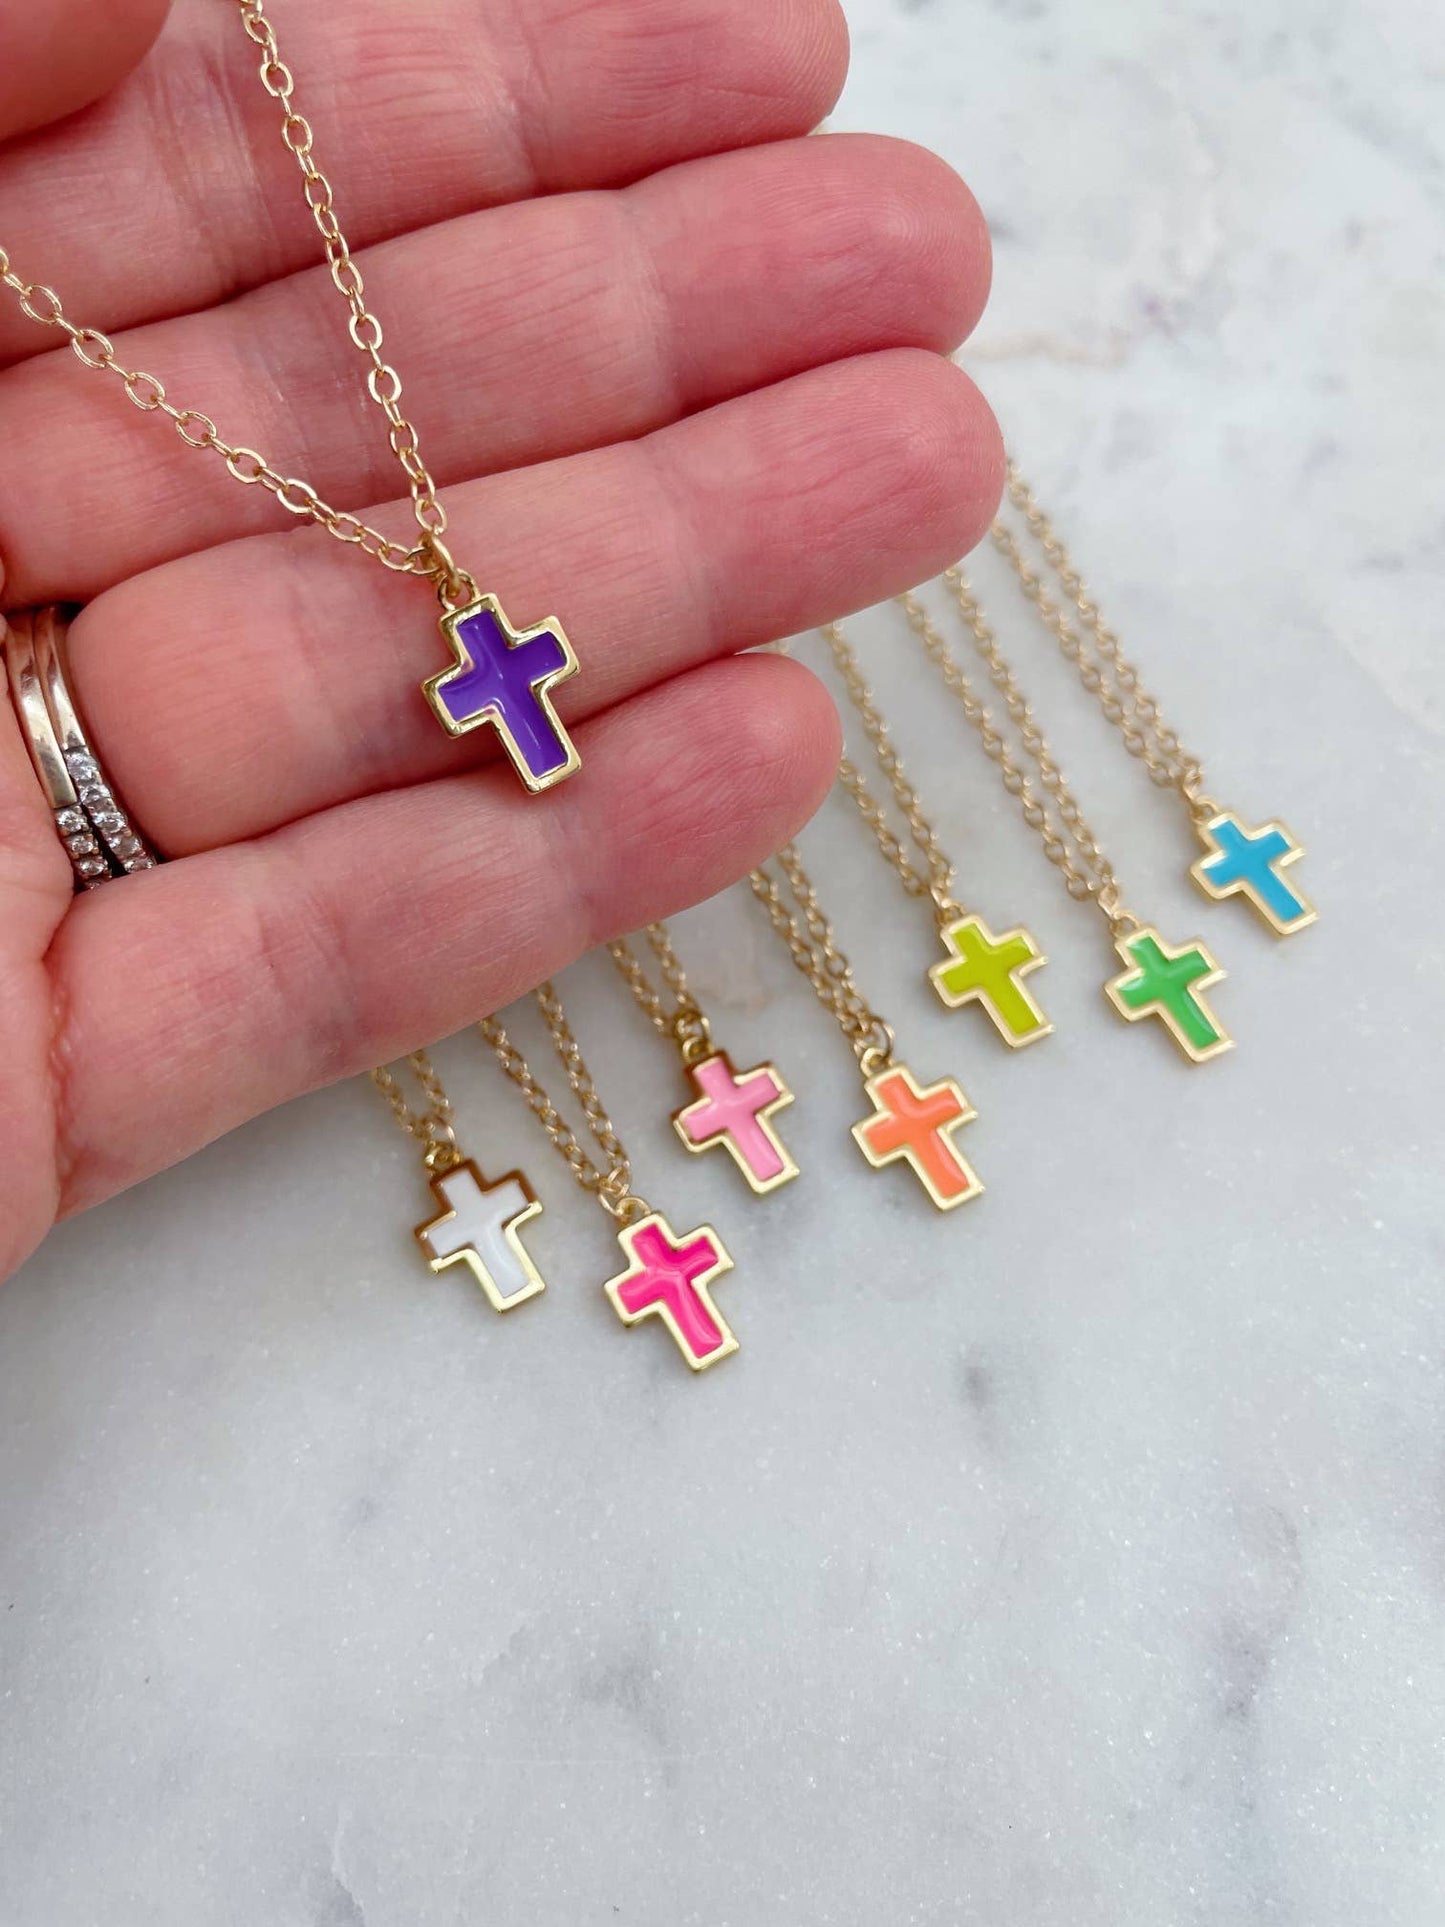 Colorful Cross Necklace, Christian Jewelry, Religious Gift